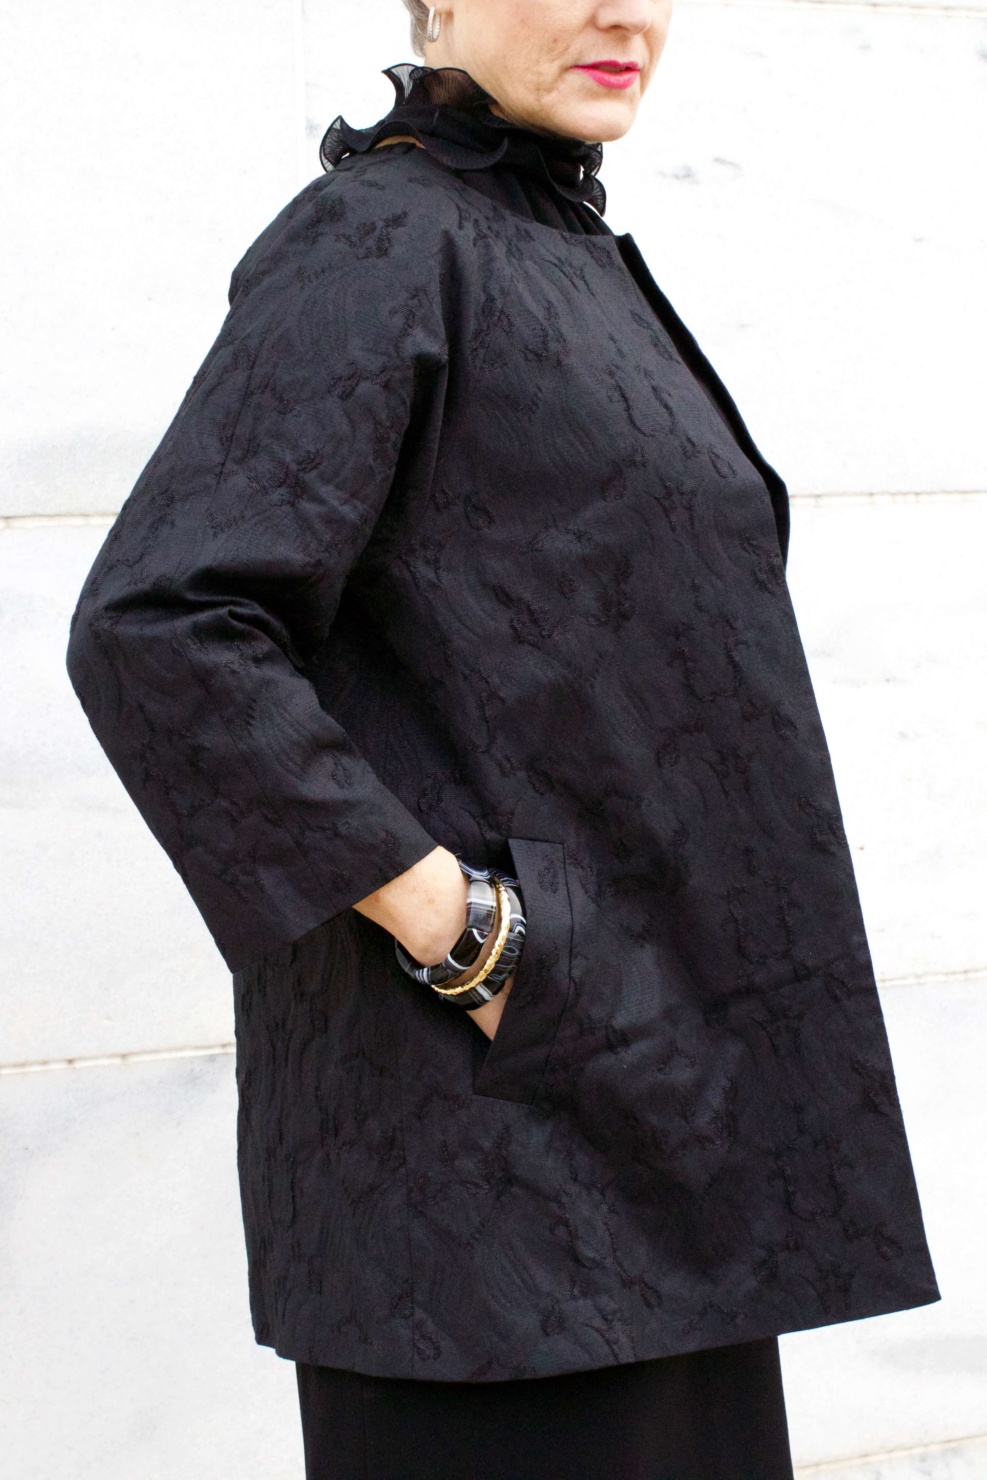 beth from Style at a Certain Age wears a Eileen Fisher shimmer jacquard 3/4 sleeve jacket and ruffled black dress 